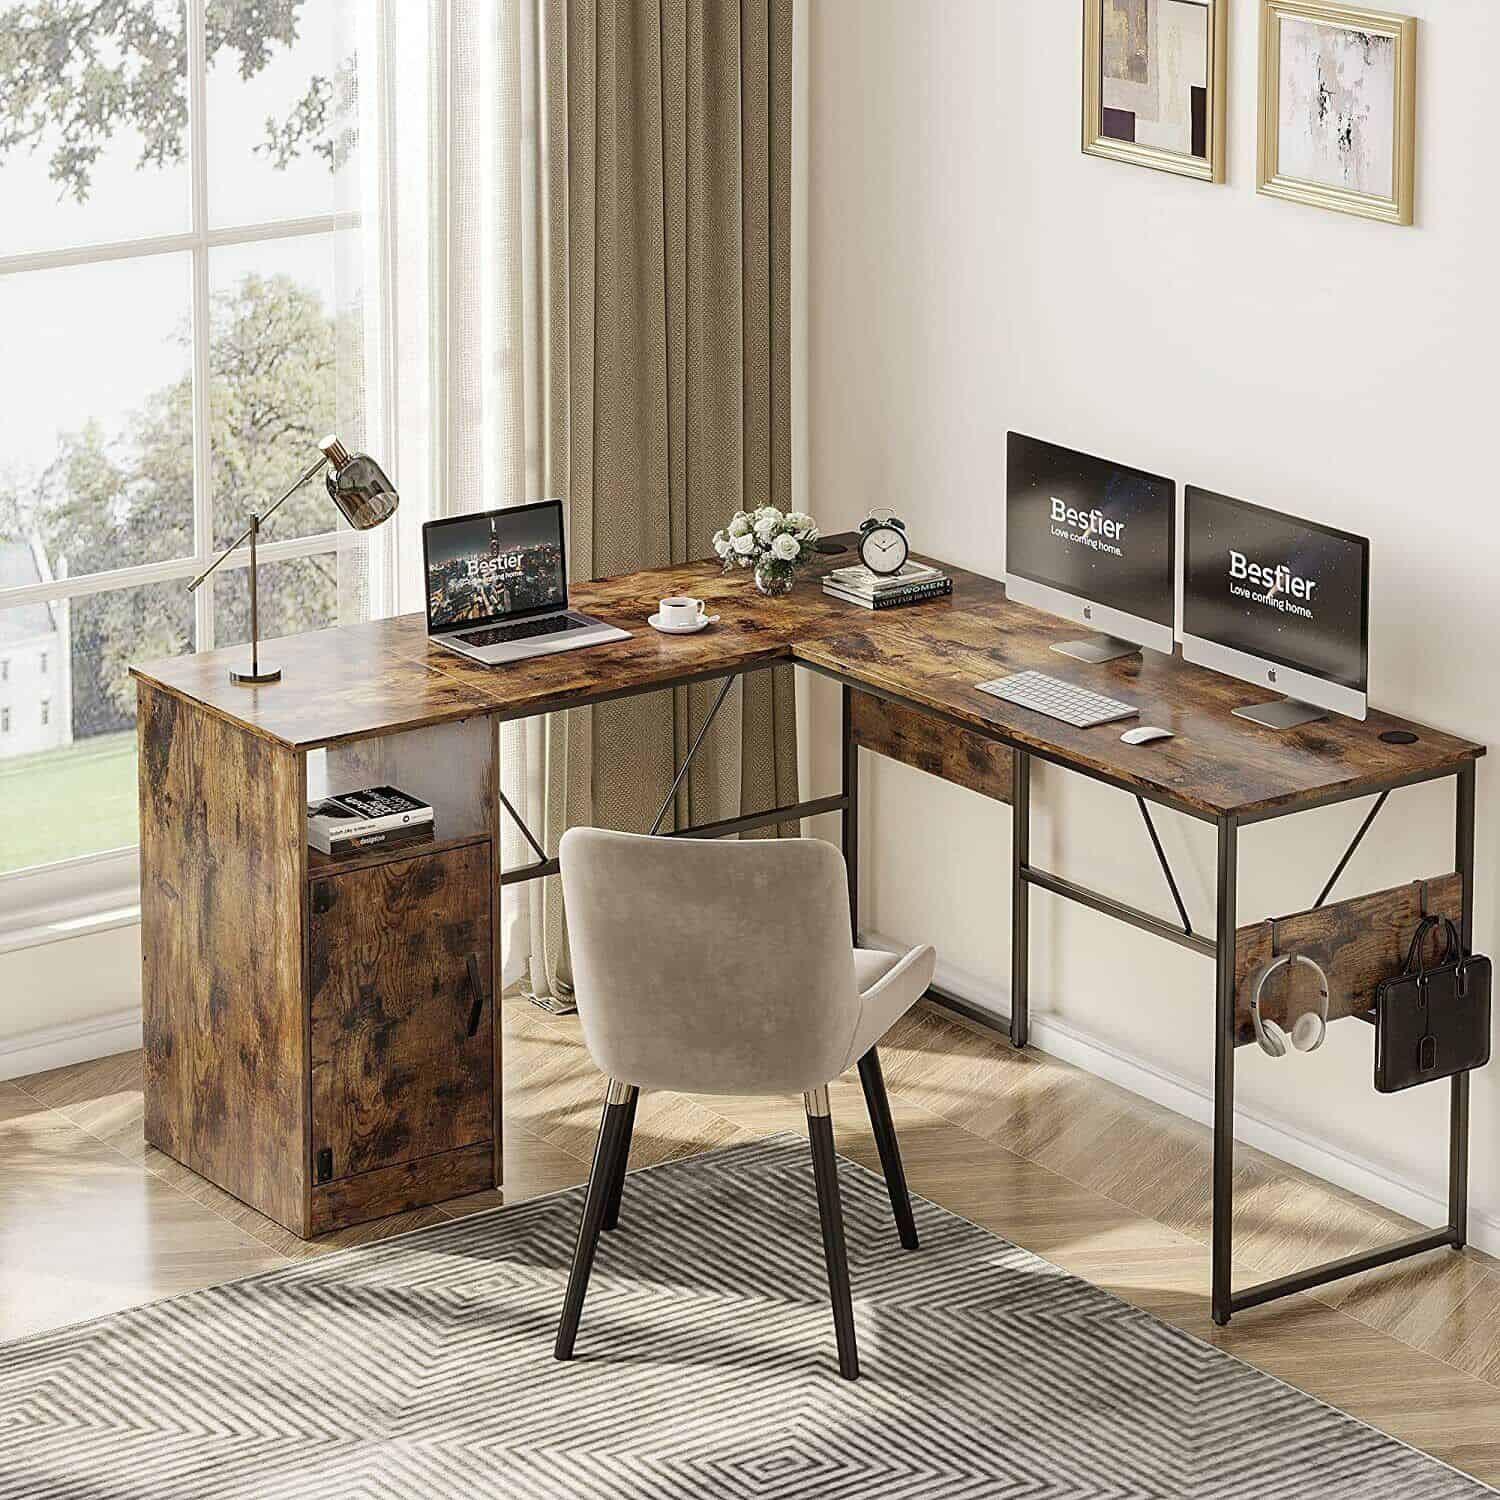 A desk with computers and a chair in front of a window.